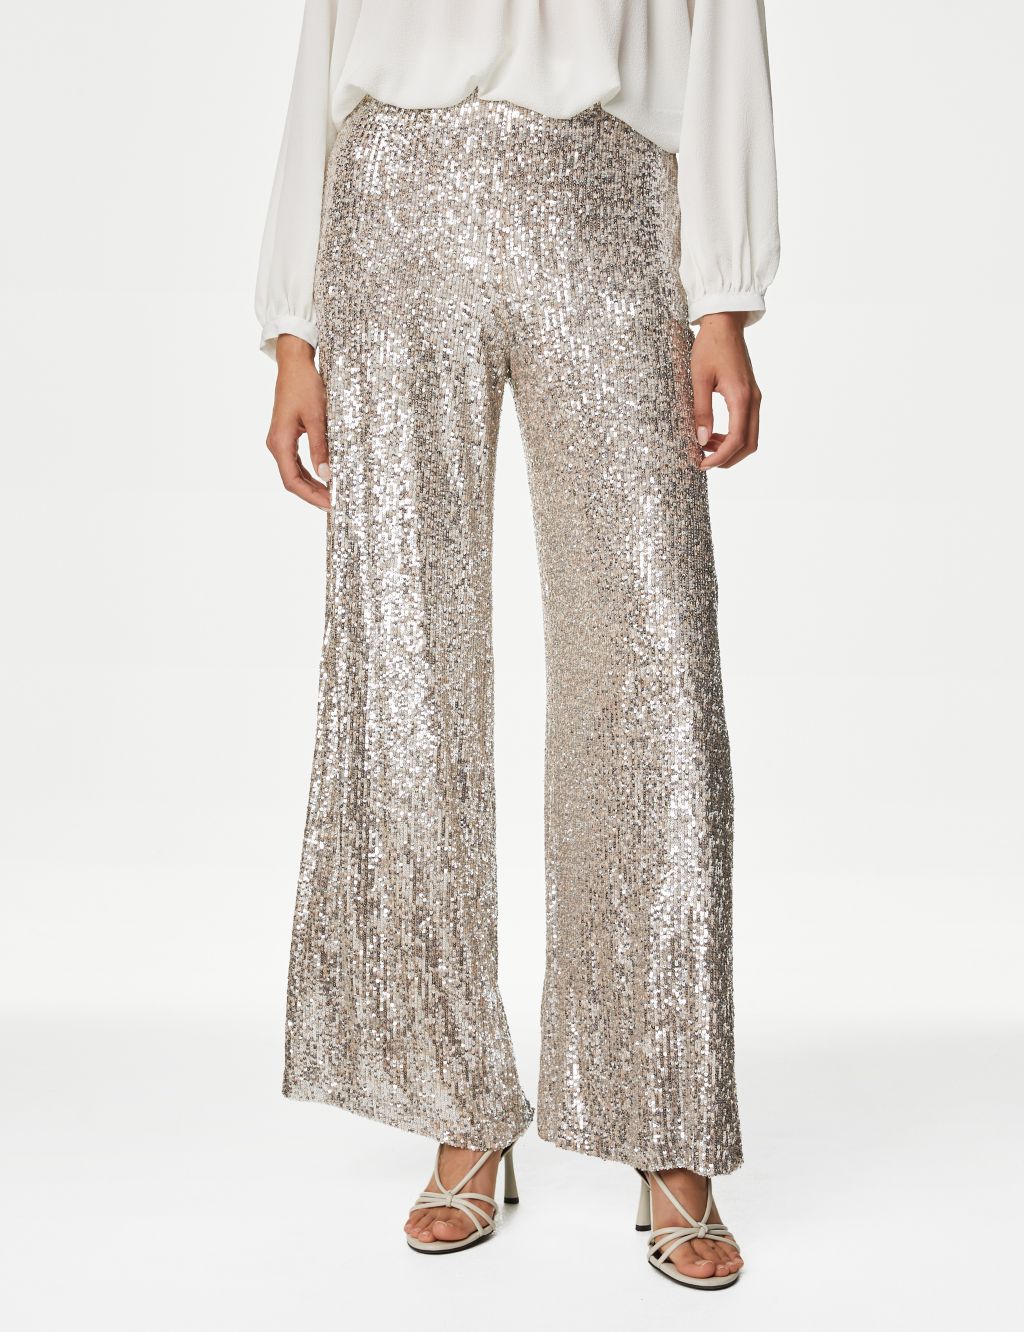 Sequin Elasticated Waist Wide Leg Trousers image 5